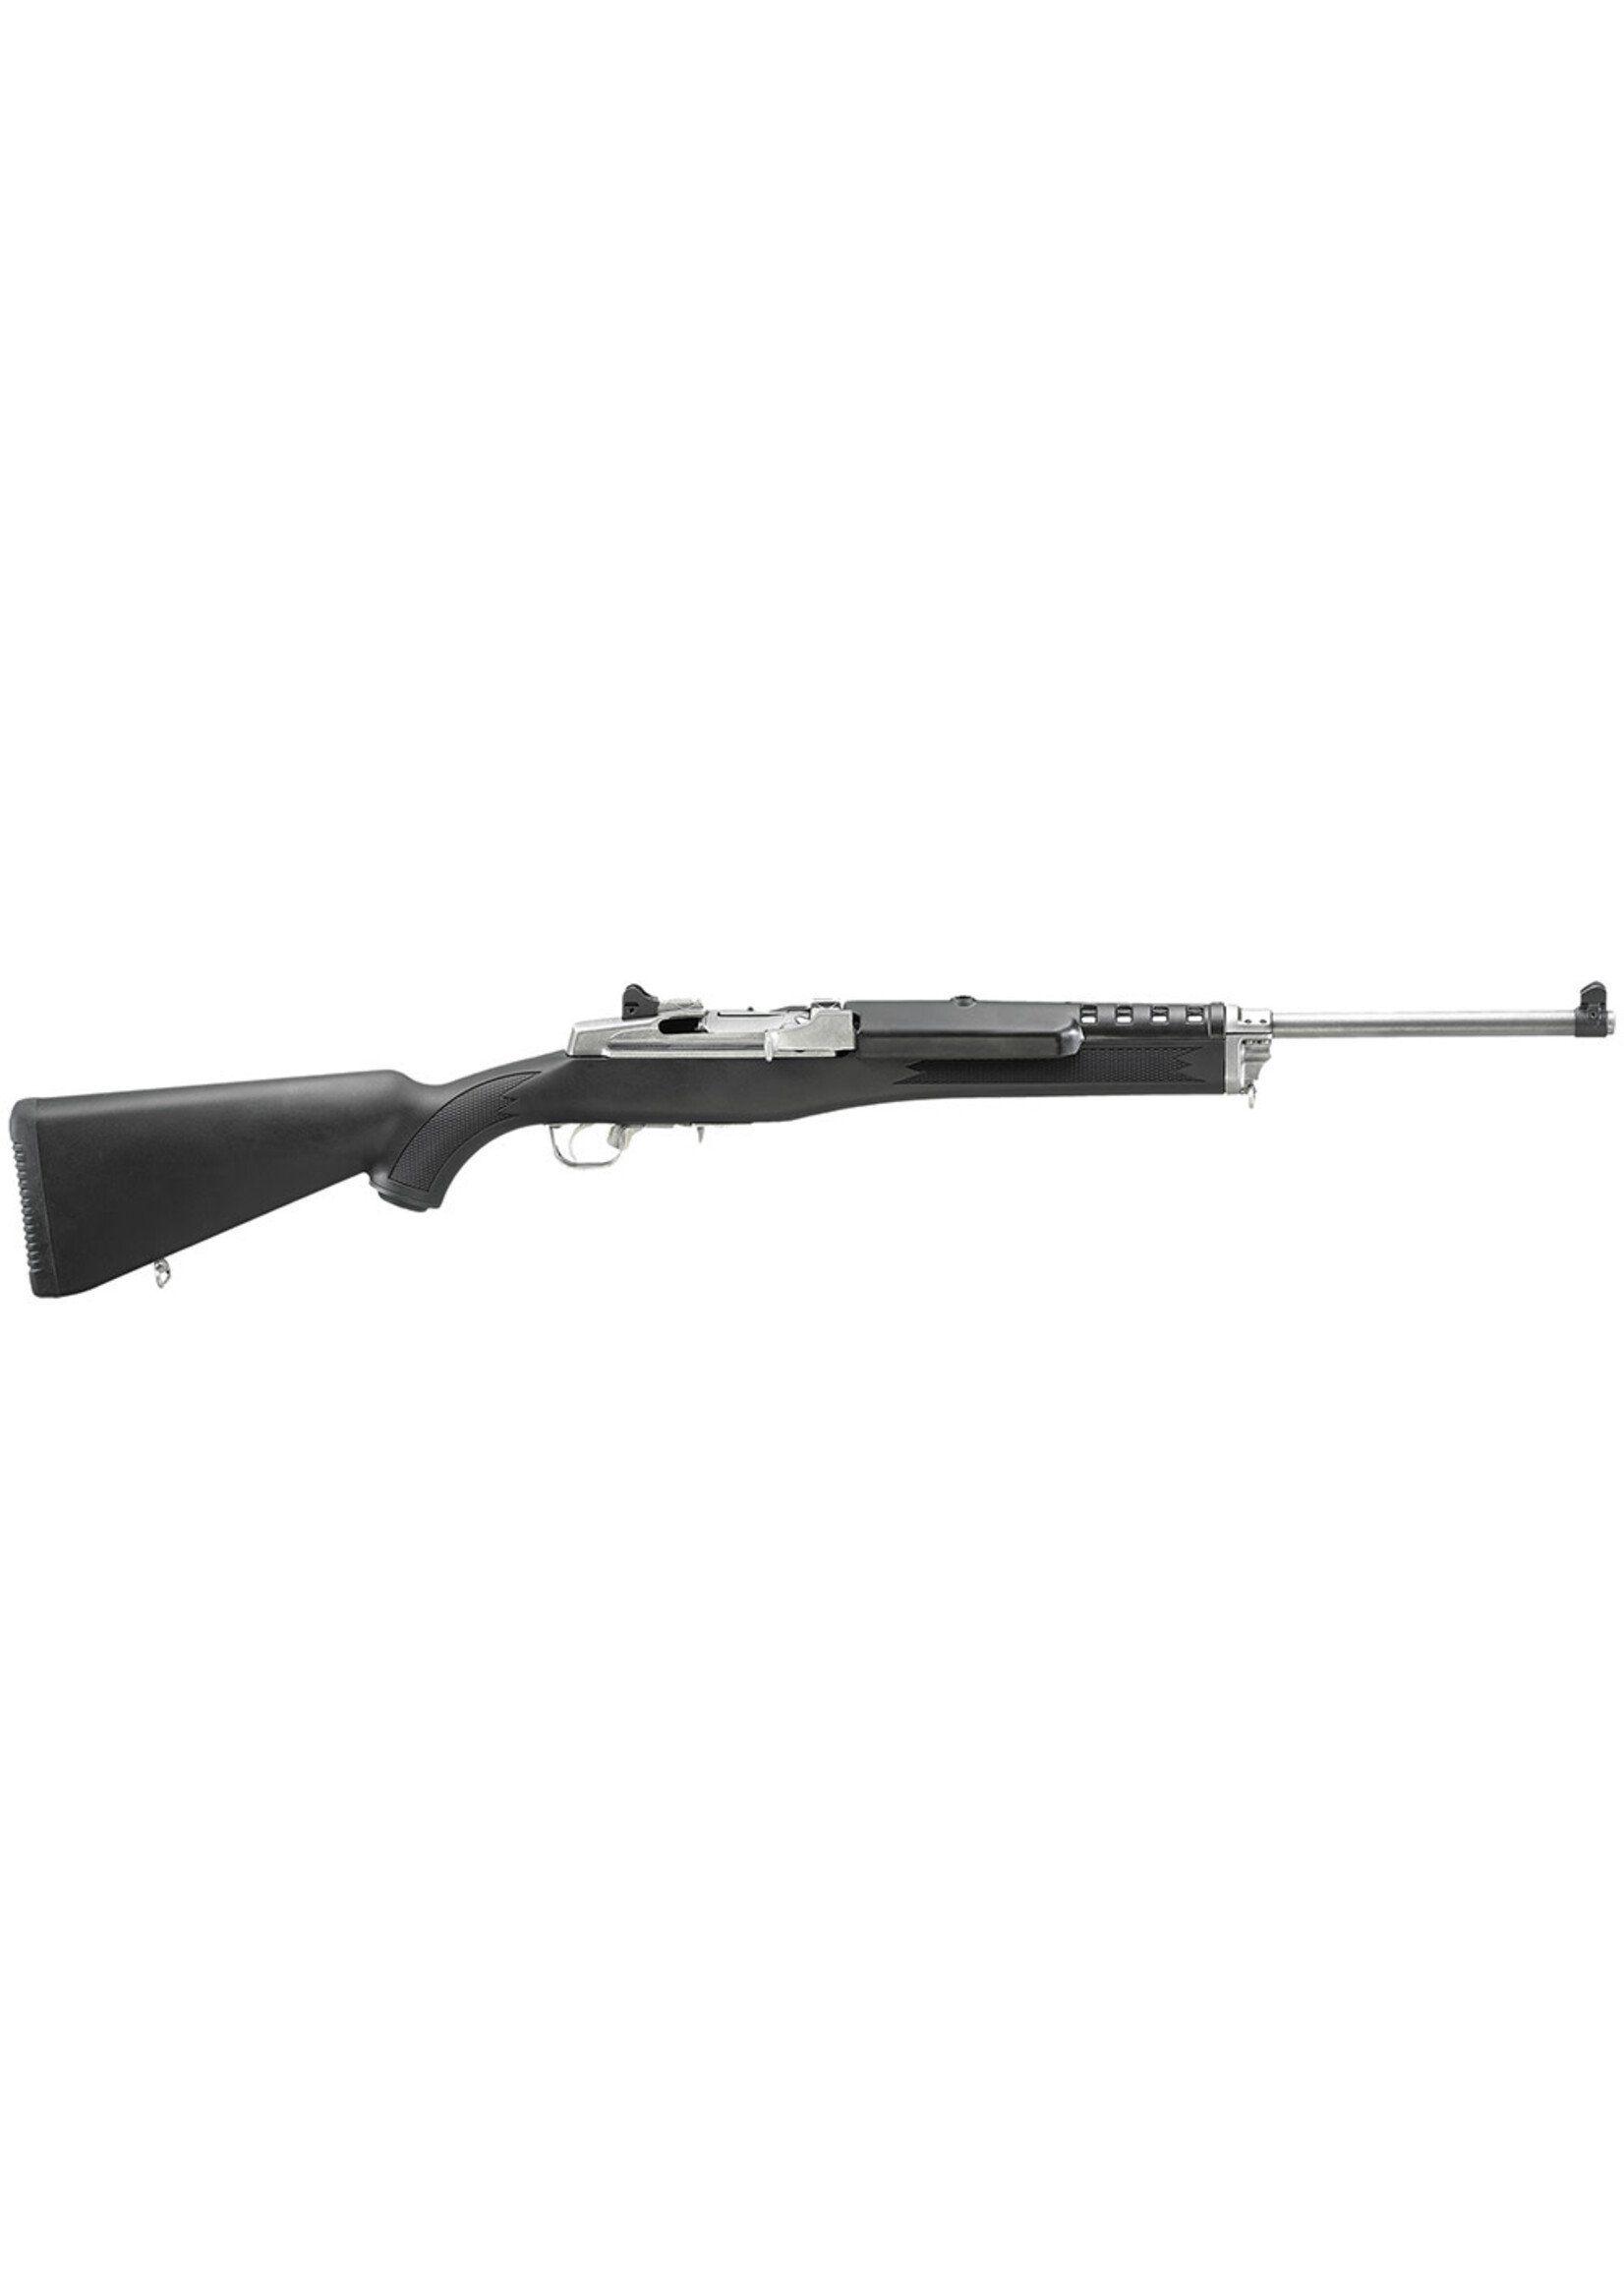 Ruger Ruger 5853 Mini Thirty 7.62x39mm 20+1 18.50" Barrel, Matte Stainless Steel, Synthetic Stock, Optics Ready